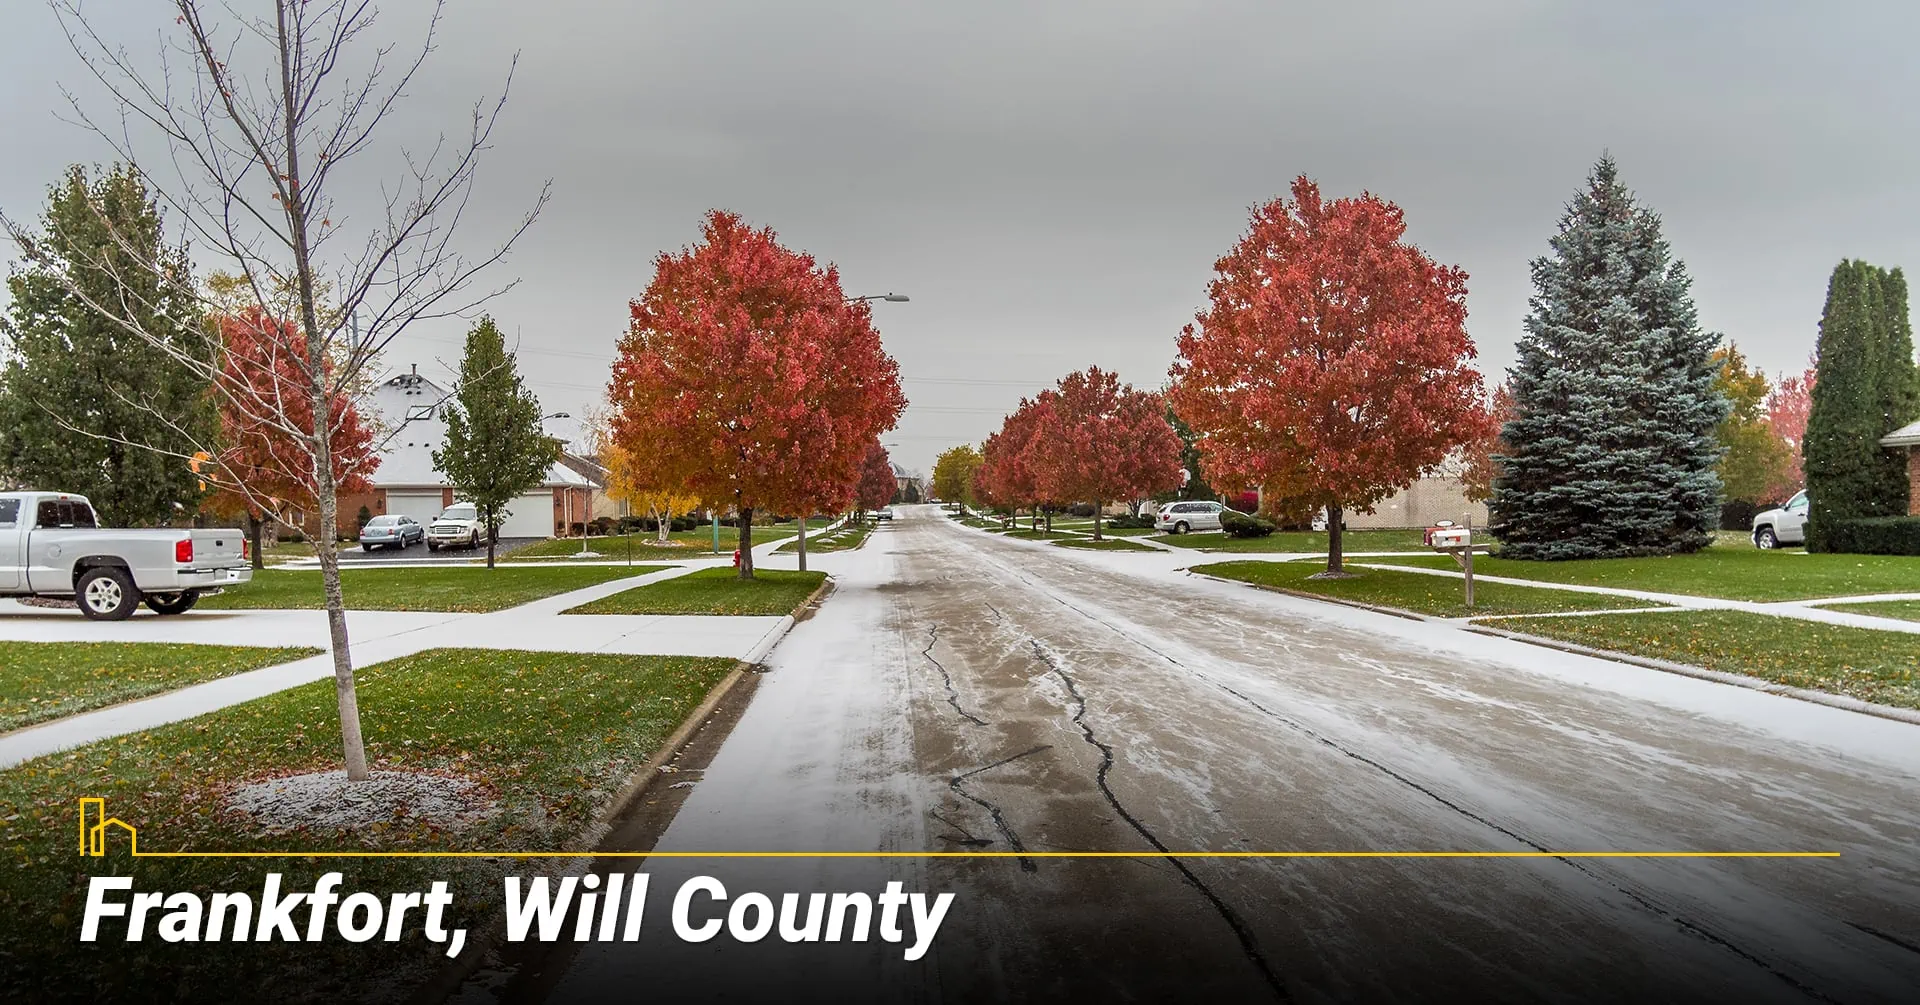 Frankfort, Will County